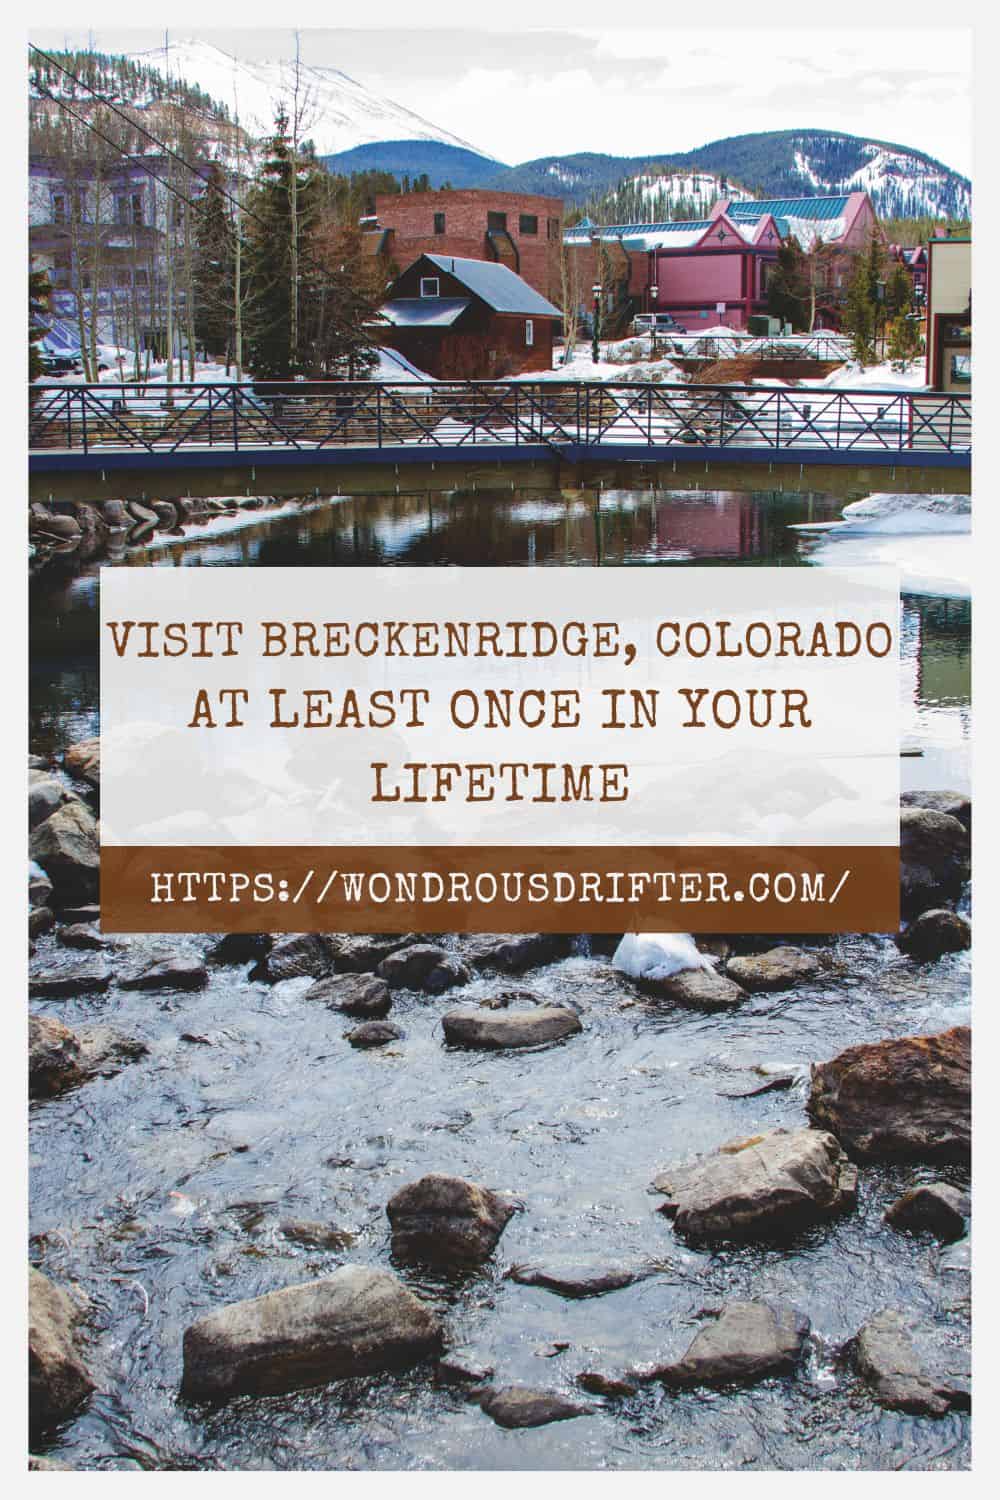 Visit Breckenridge Colorado at least once in your lifetime